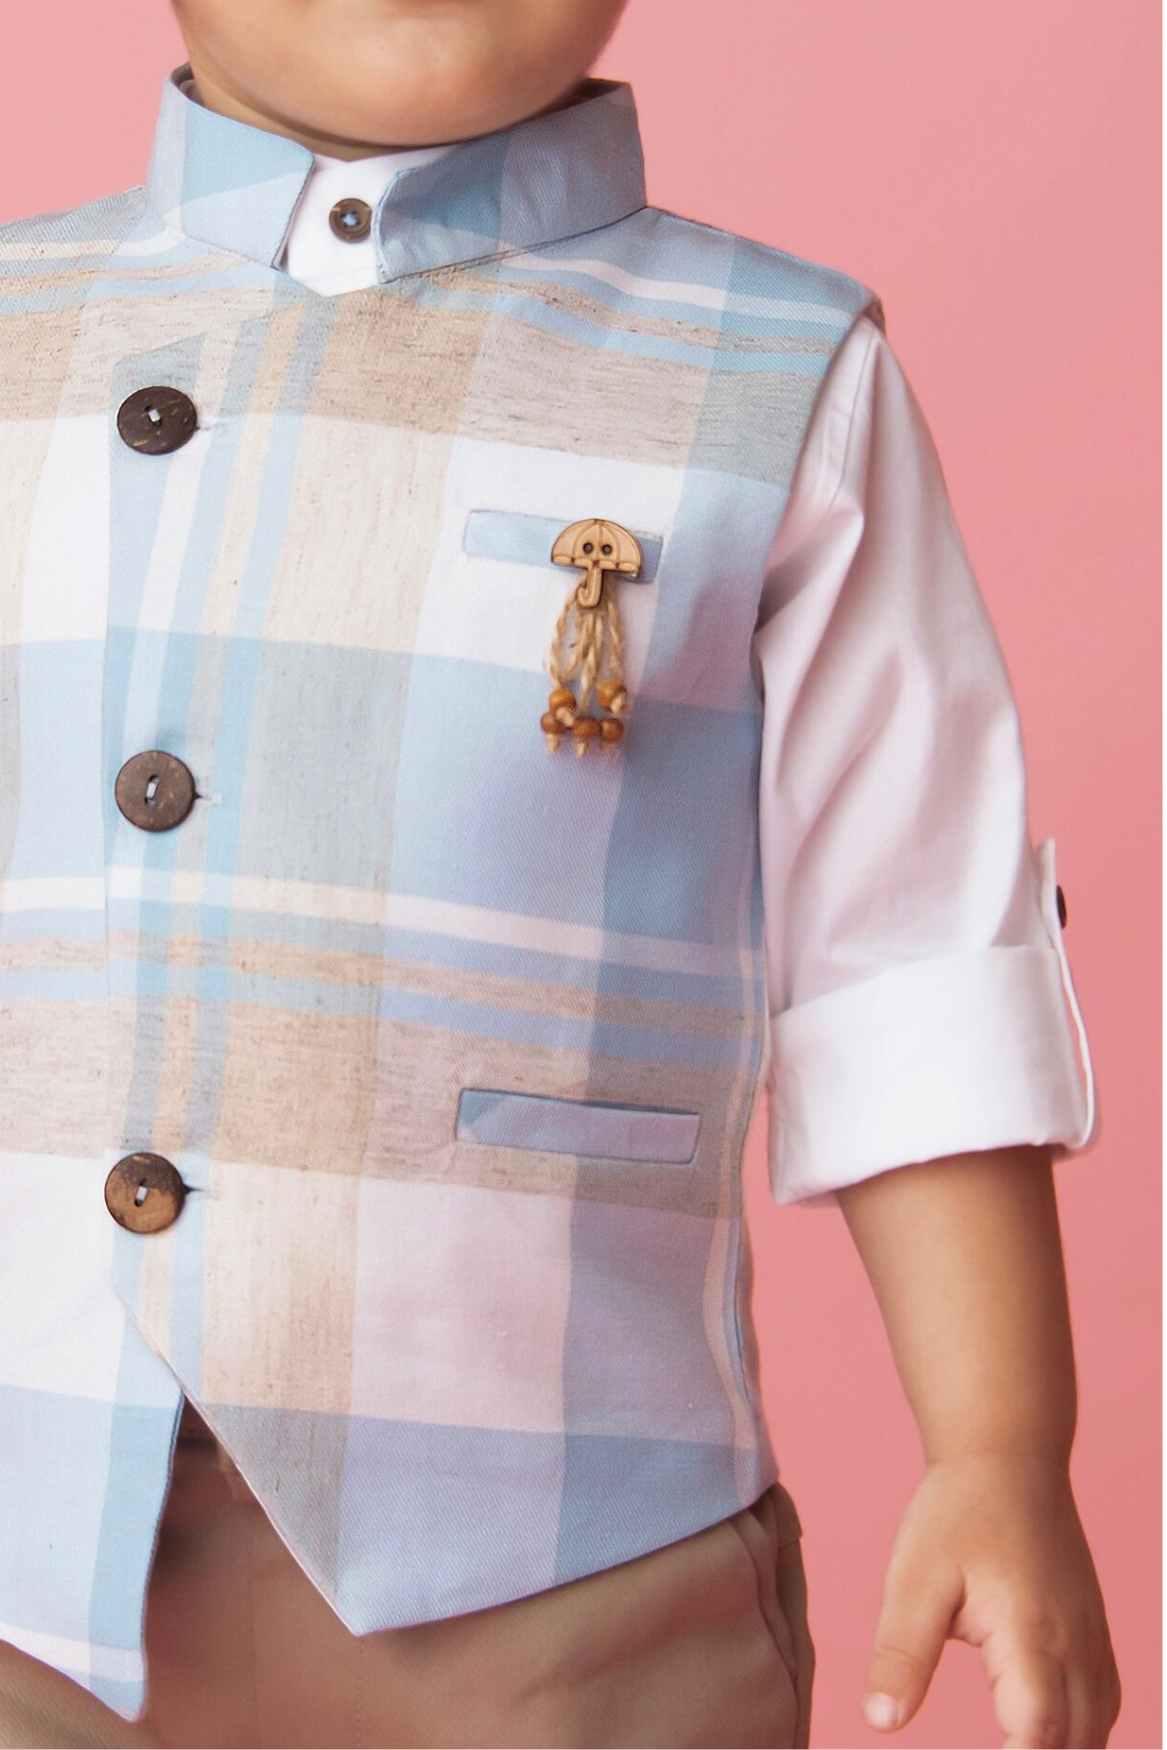 Classic White Shirt With Blue Checked Waist Coat And Brown Pant Set For Boys - Lagorii Kids